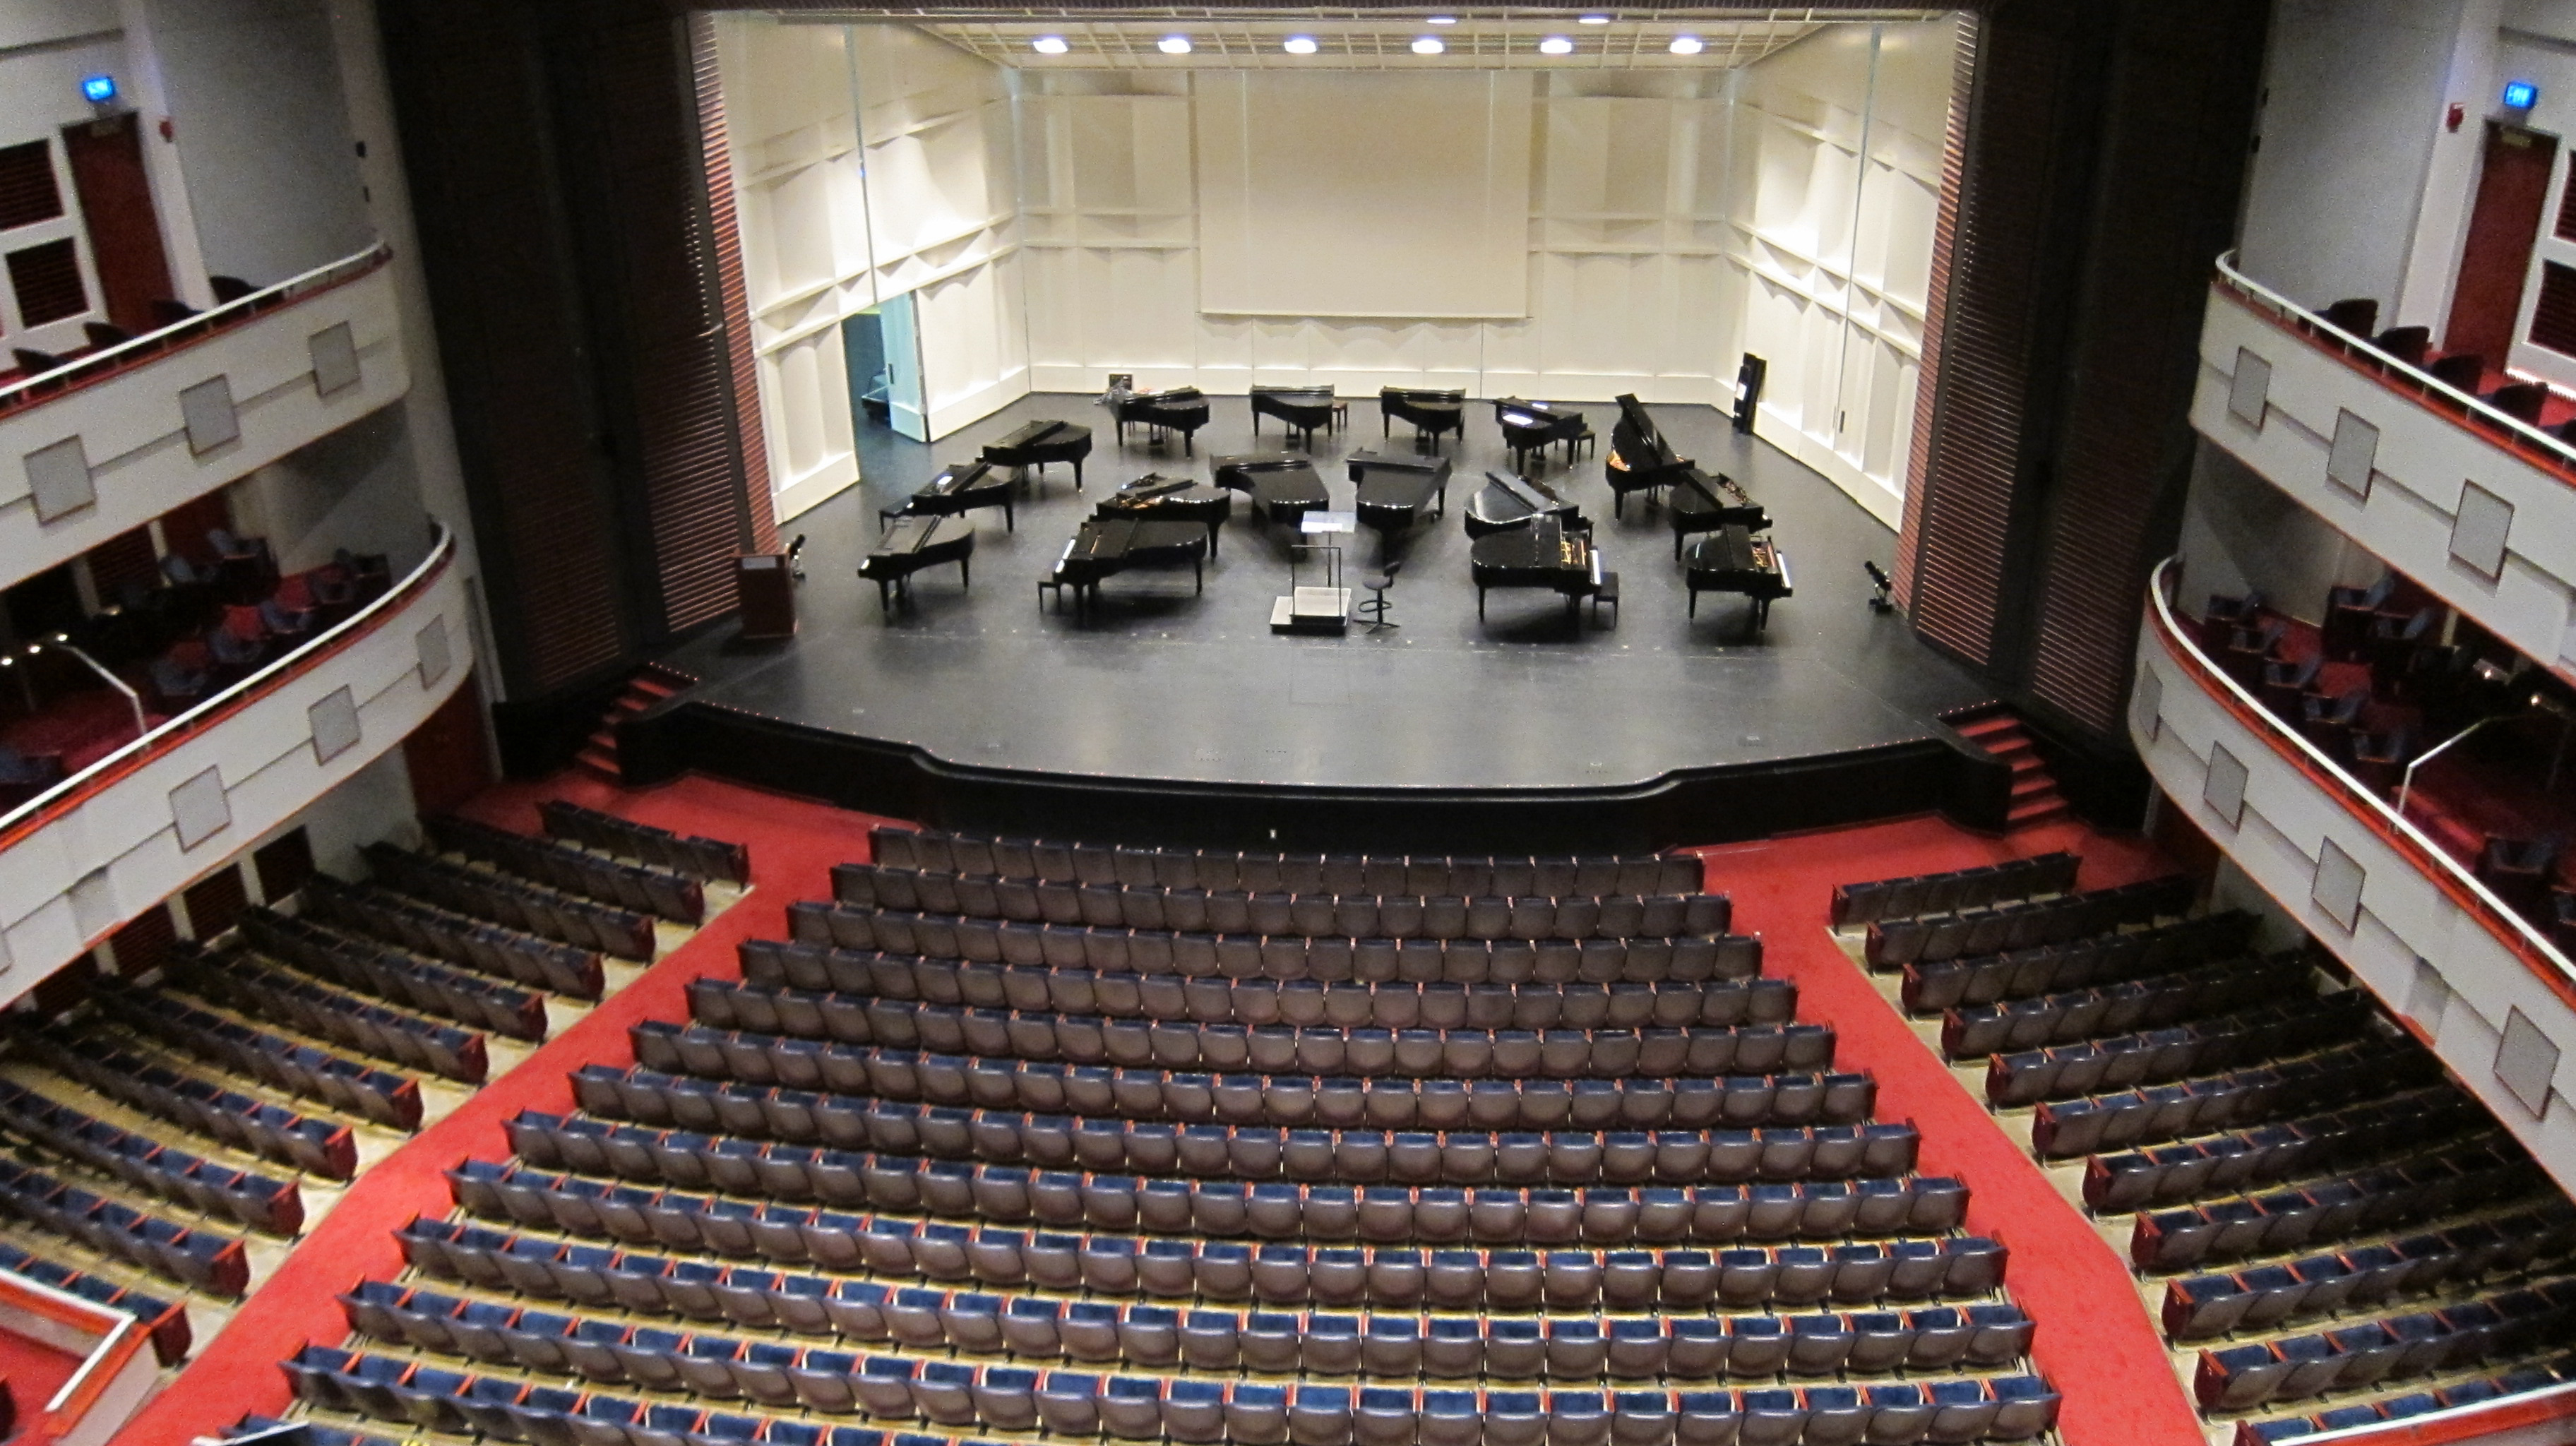 A view of Lied Center auditorium from the balcony looking down at empty seating and the stage.